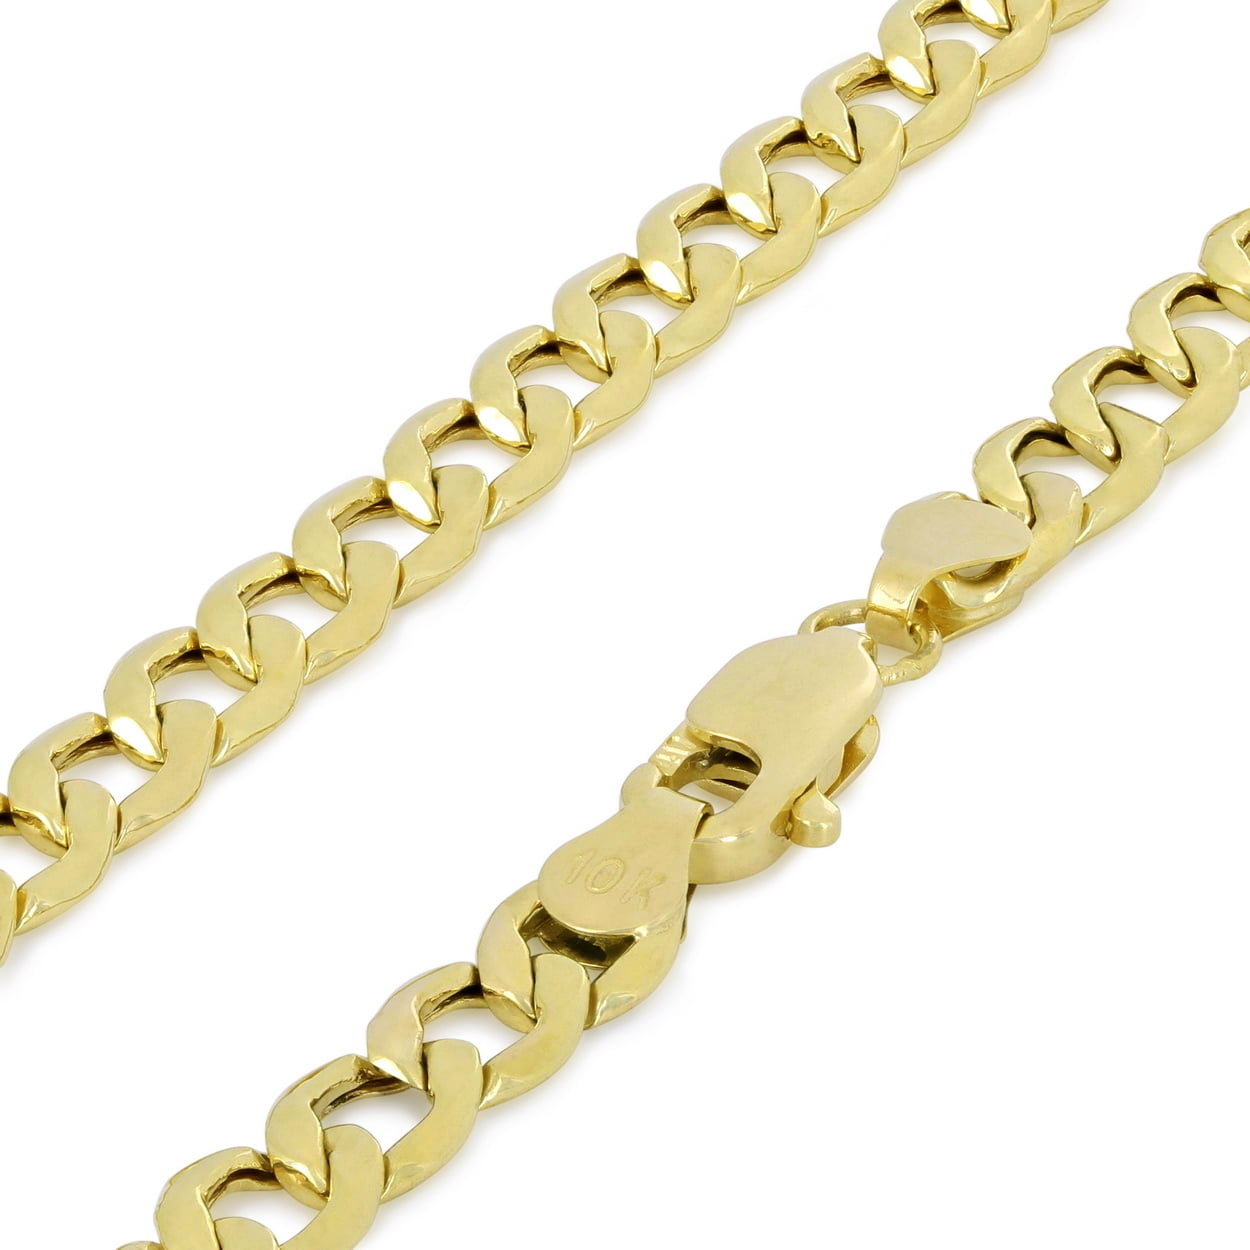 Jewel Tie 925 Sterling Silver 8mm Close Link Flat Cuban Curb Chain Necklace with Secure Lobster Lock Clasp